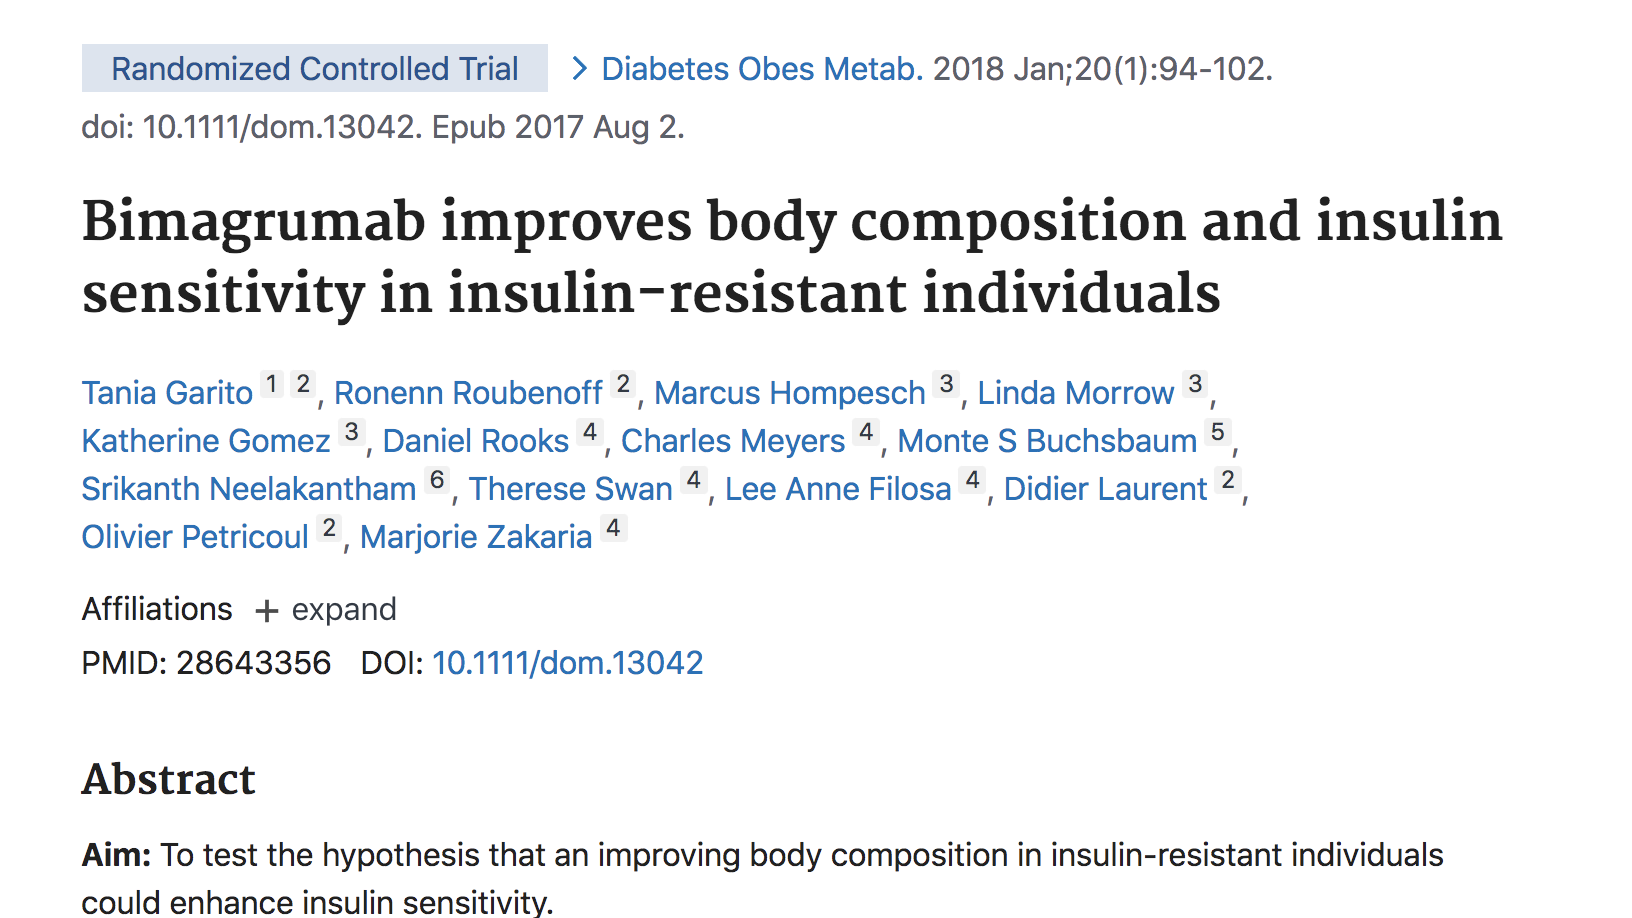 image of Bimagrumab improves body composition and insulin sensitivity in insulin-resistant individuals.